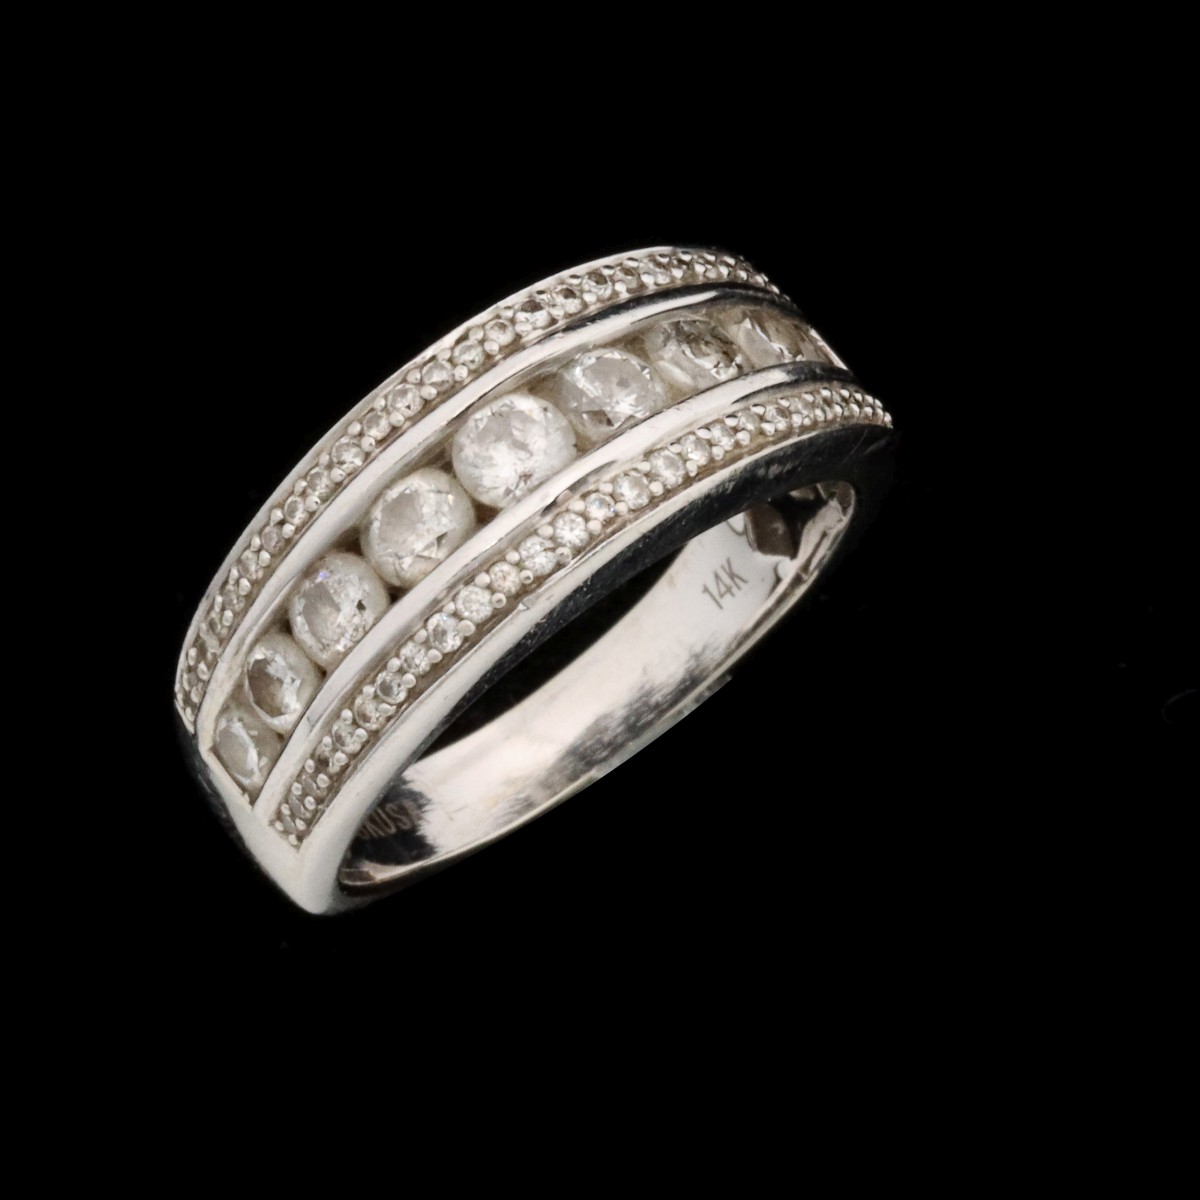 A 14K GOLD AND DIAMOND FASHION RING, APPROX. 0.95 CTW